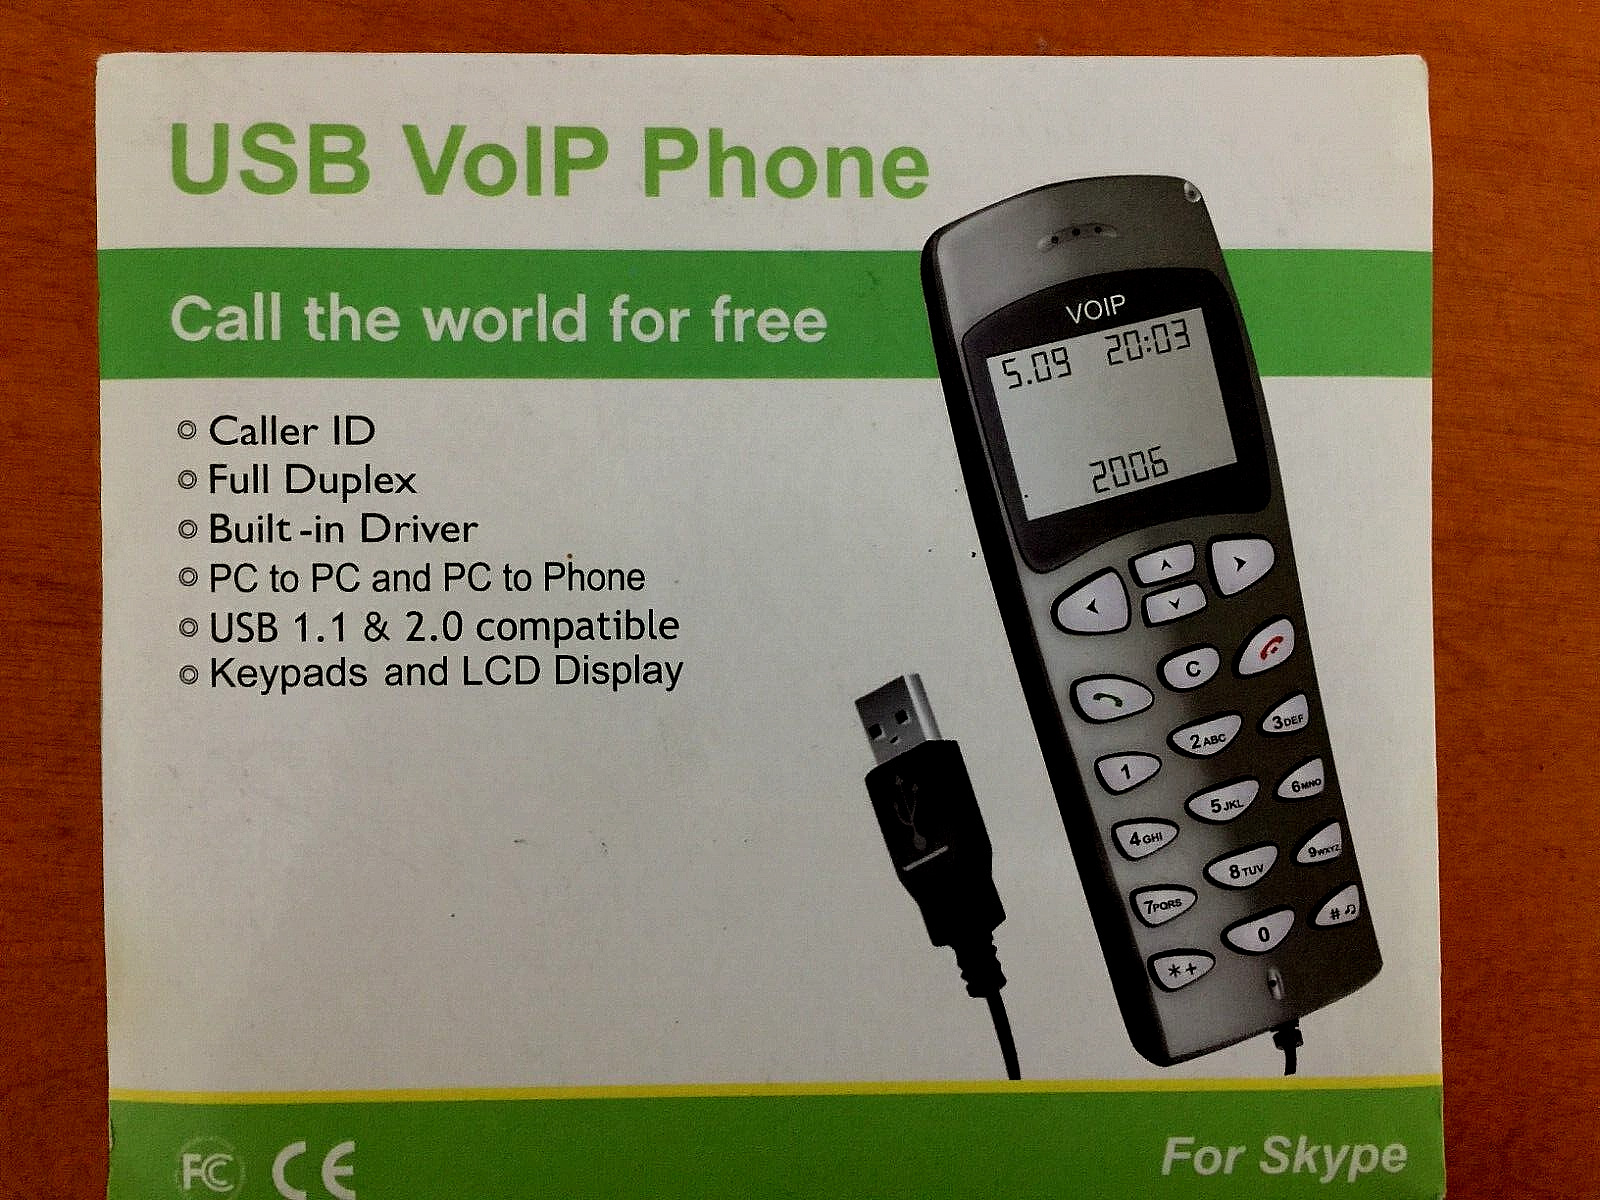 USB VoIP Portable Phone, Skype, Caller ID, LCD Display, PC 2 PC & PC 2 Phones